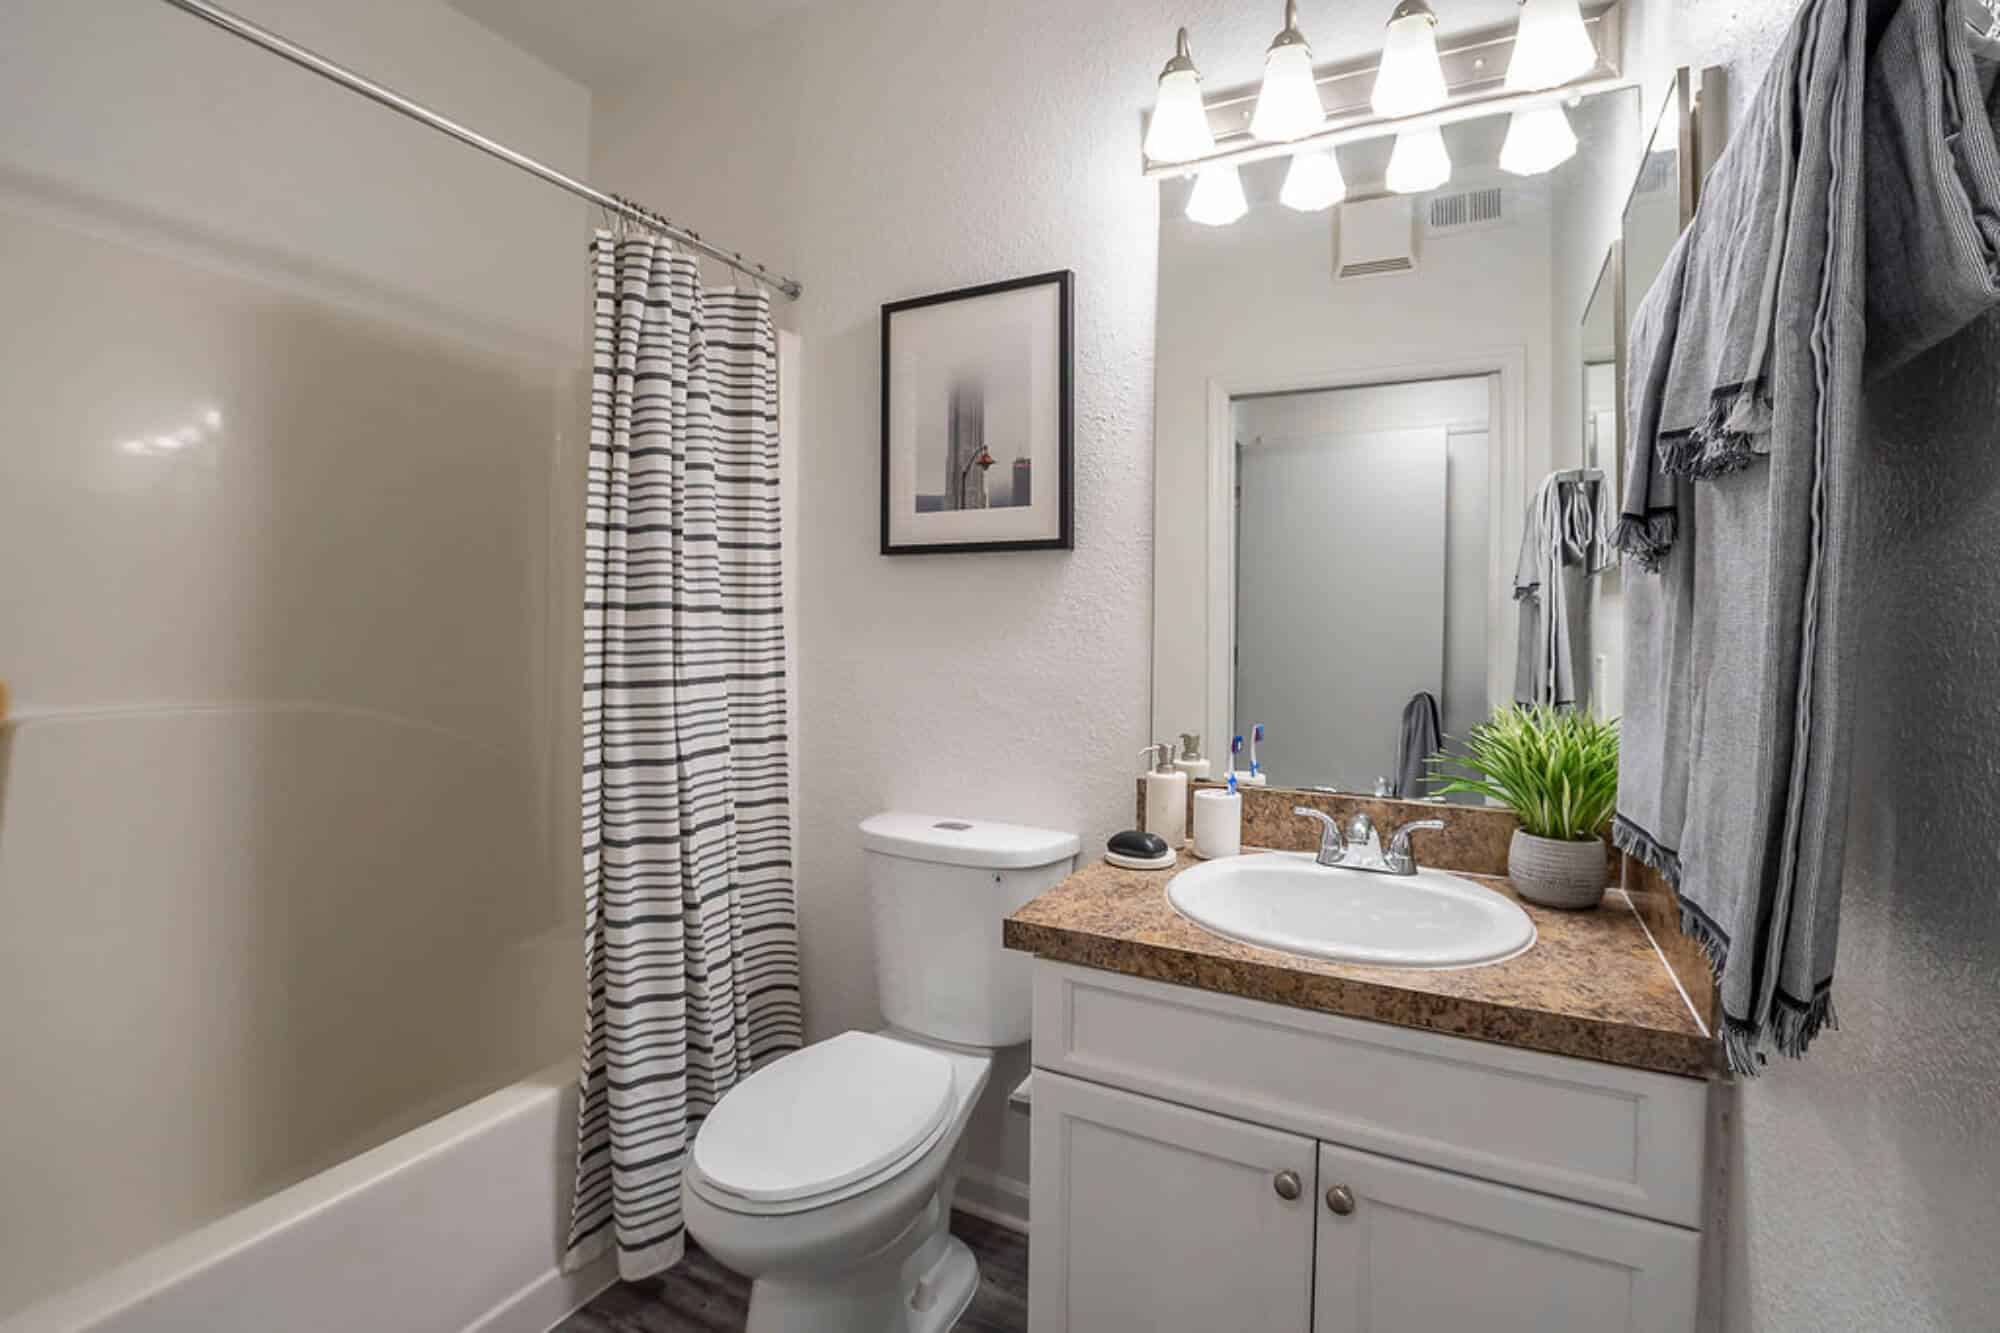 arden villas off campus apartments near the university of central florida ucf orlando private bathrooms tub showers